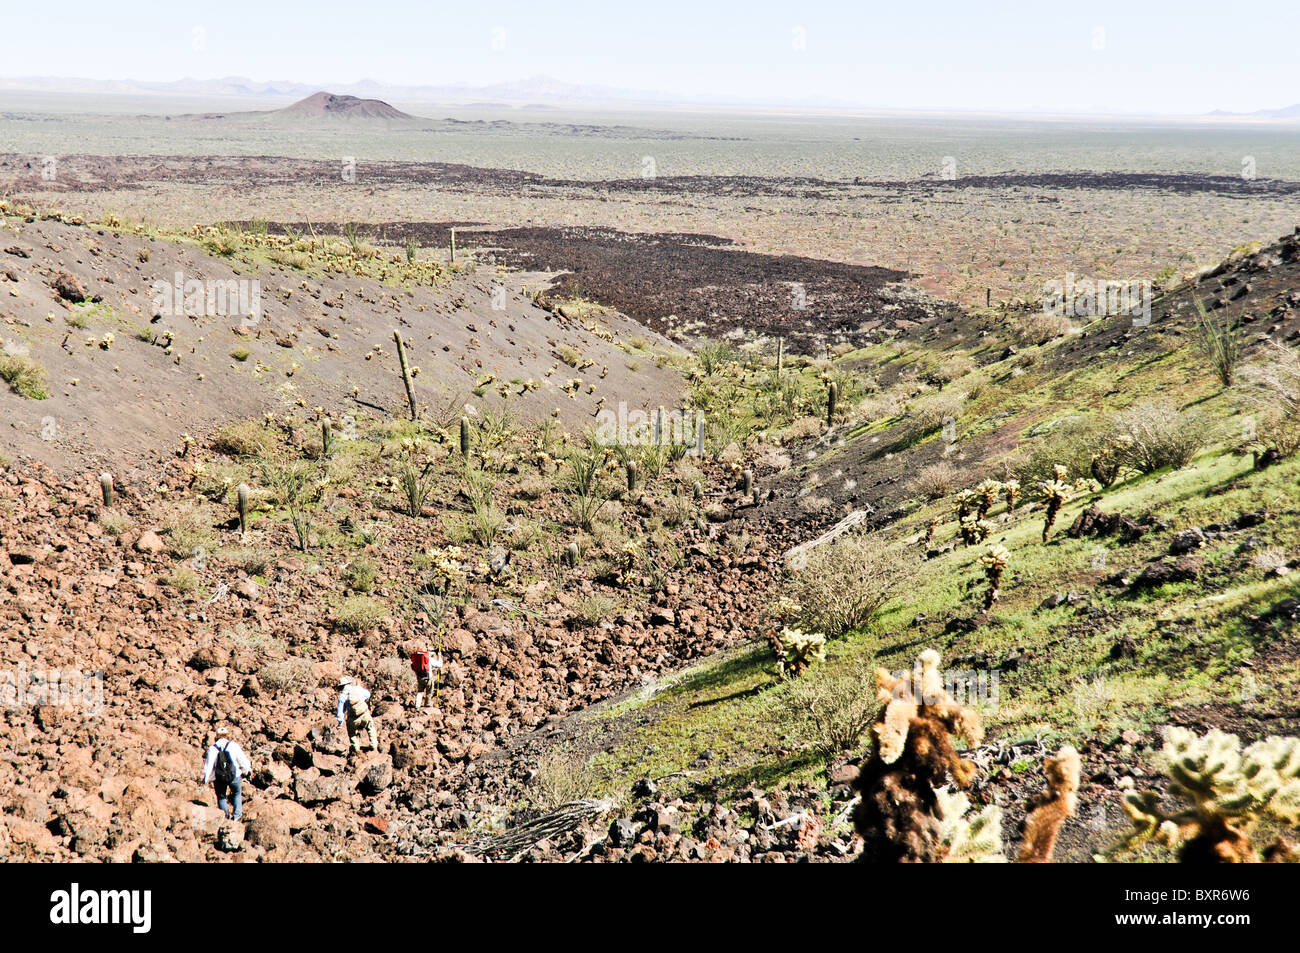 Hikers traversing rugged lava fields on side of Tecolote cinder cone, El Pinacate Biosphere Reserve, Sonora, Mexico Stock Photo